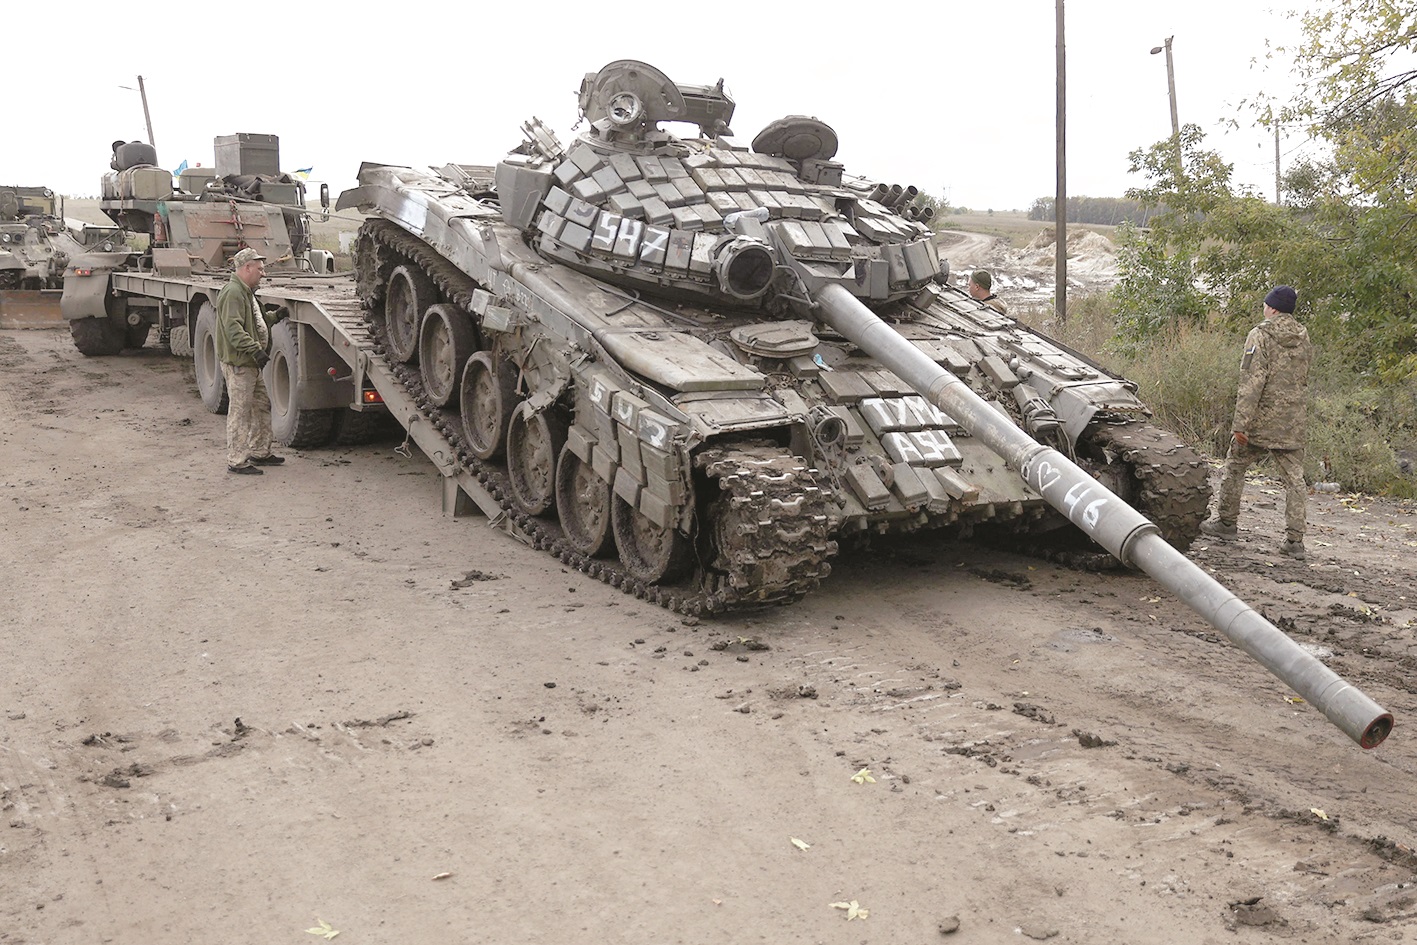 A Russian T-72 tank is loaded on a truck by Ukrainian soldiers outside the town of Izyum, as the Ukrainian counter-offensive seized most of the northeast Kharkiv region.